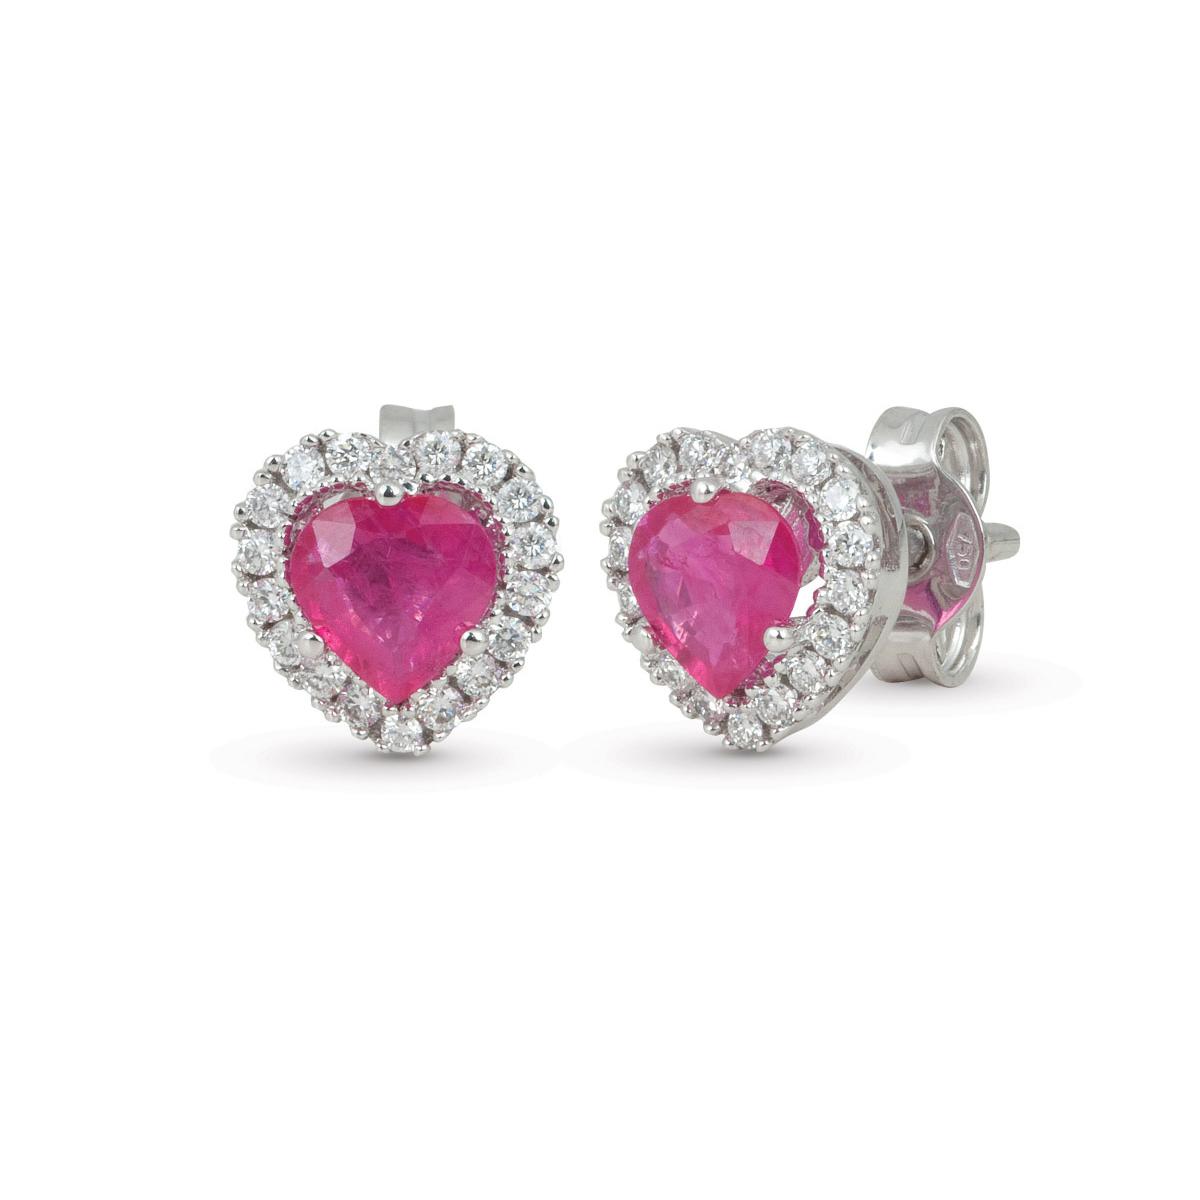 18kt white gold earrings with diamonds and central heart precious stones - OD280